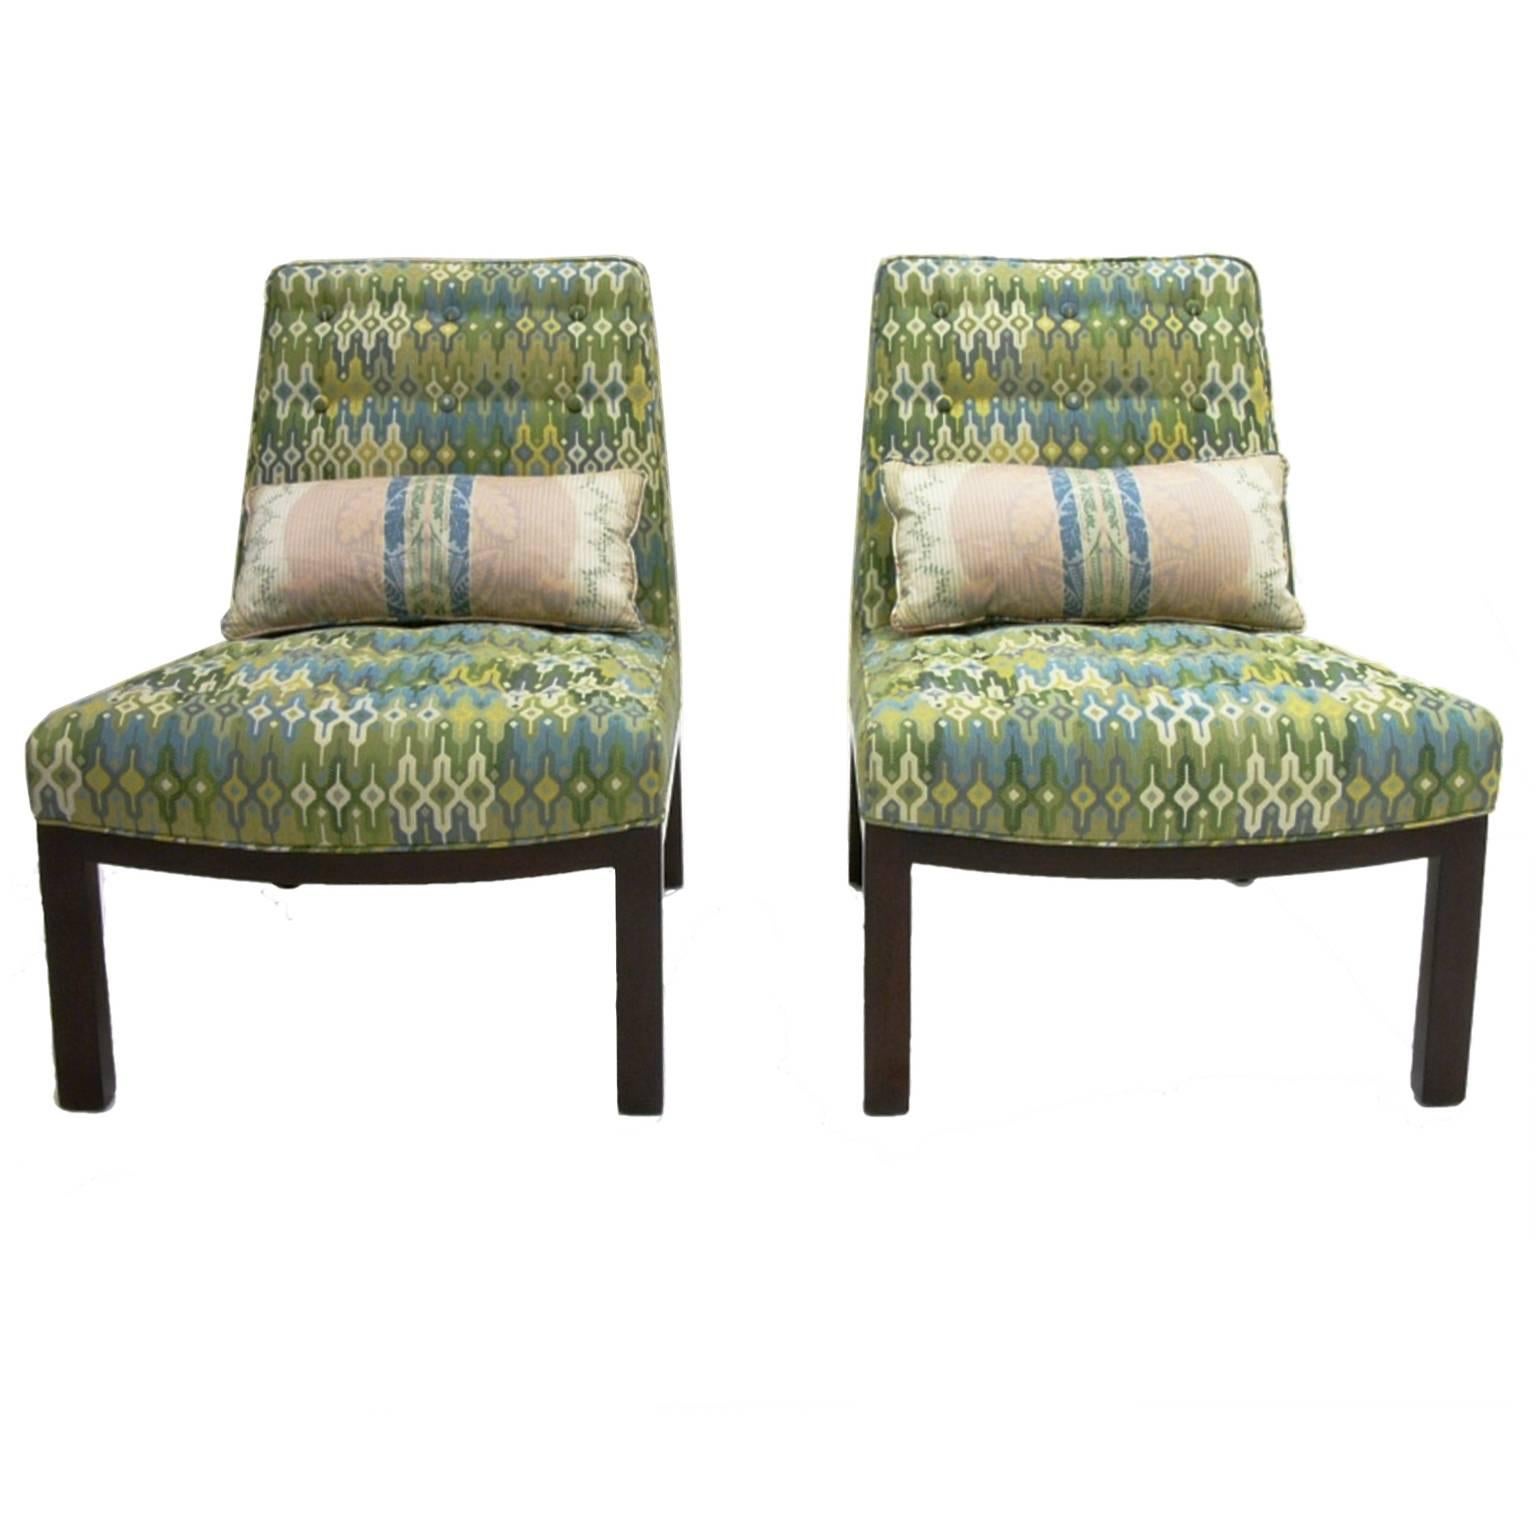 Mid-Century Modern Pair of Newly Upholstered Slipper Chairs by Edward Wormley for Dunbar Geometric 